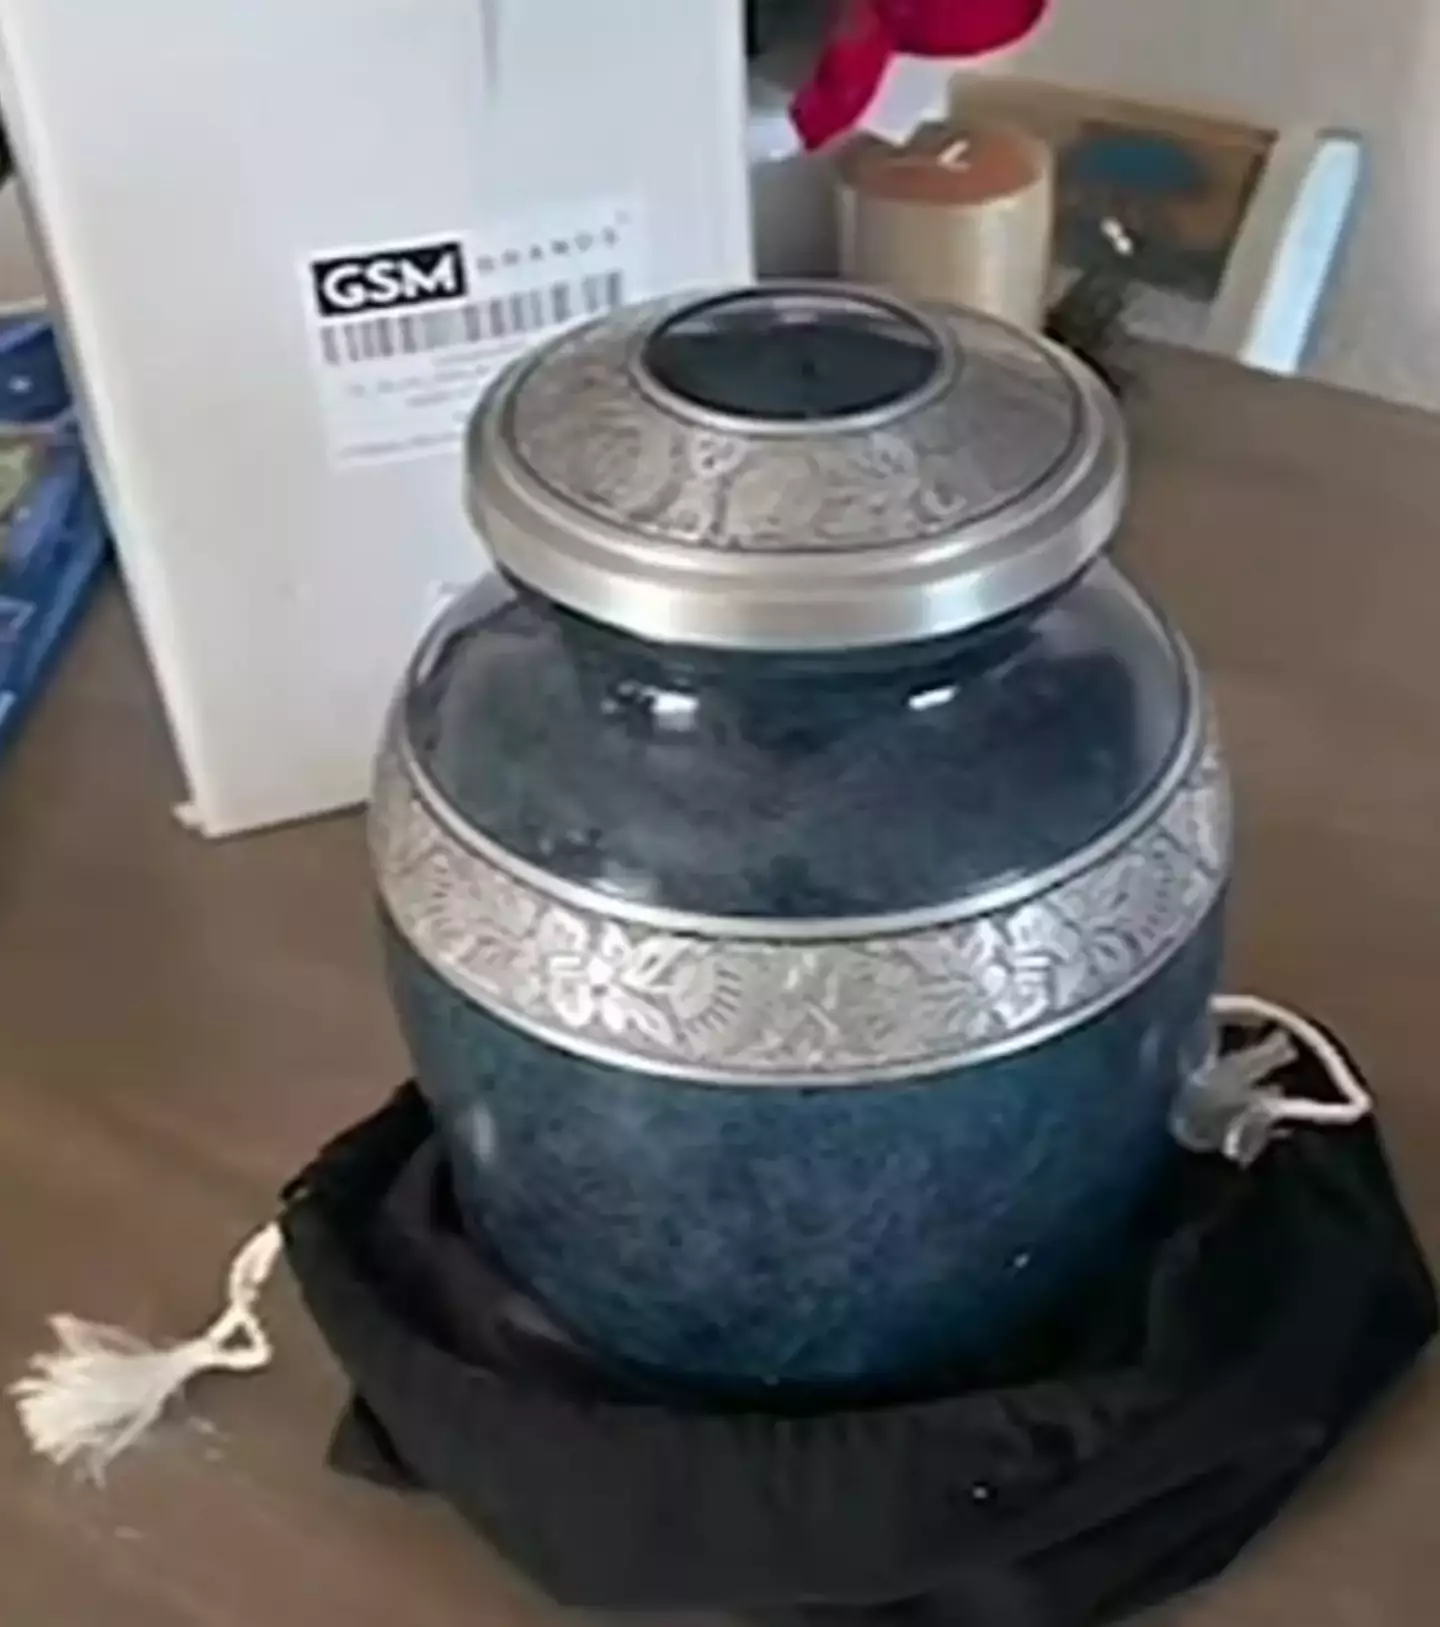 His family received an urn of what they thought were his ashes.